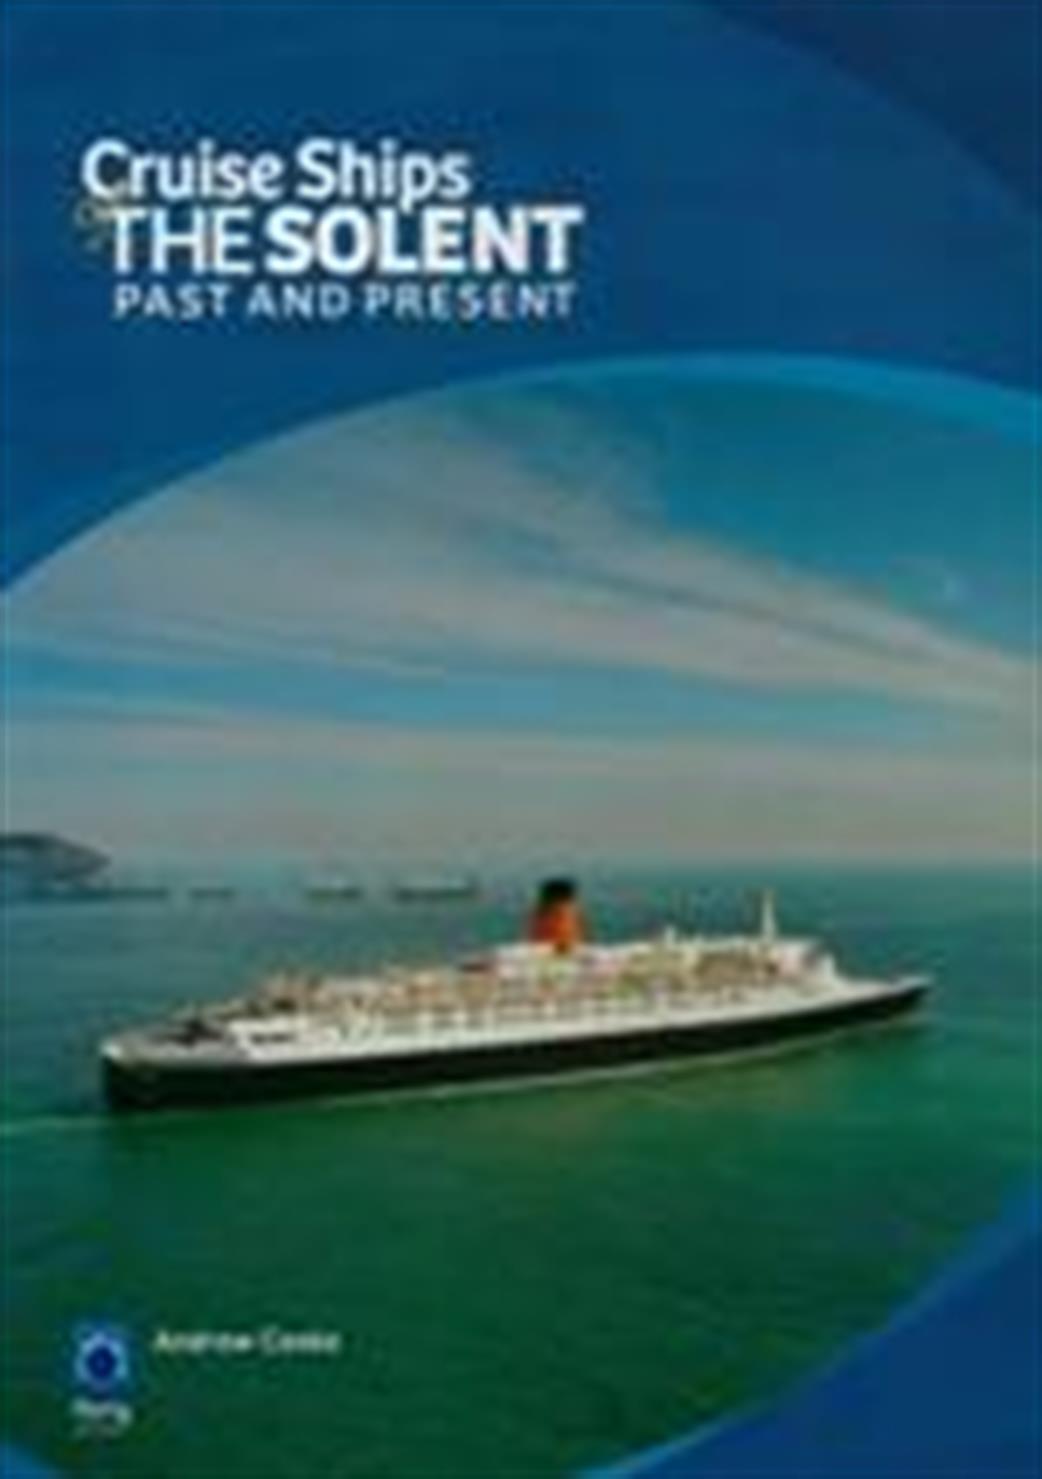 Ian Allan Publishing  9781906608170 Cruise Ships of the Solent by Andrew Cooke